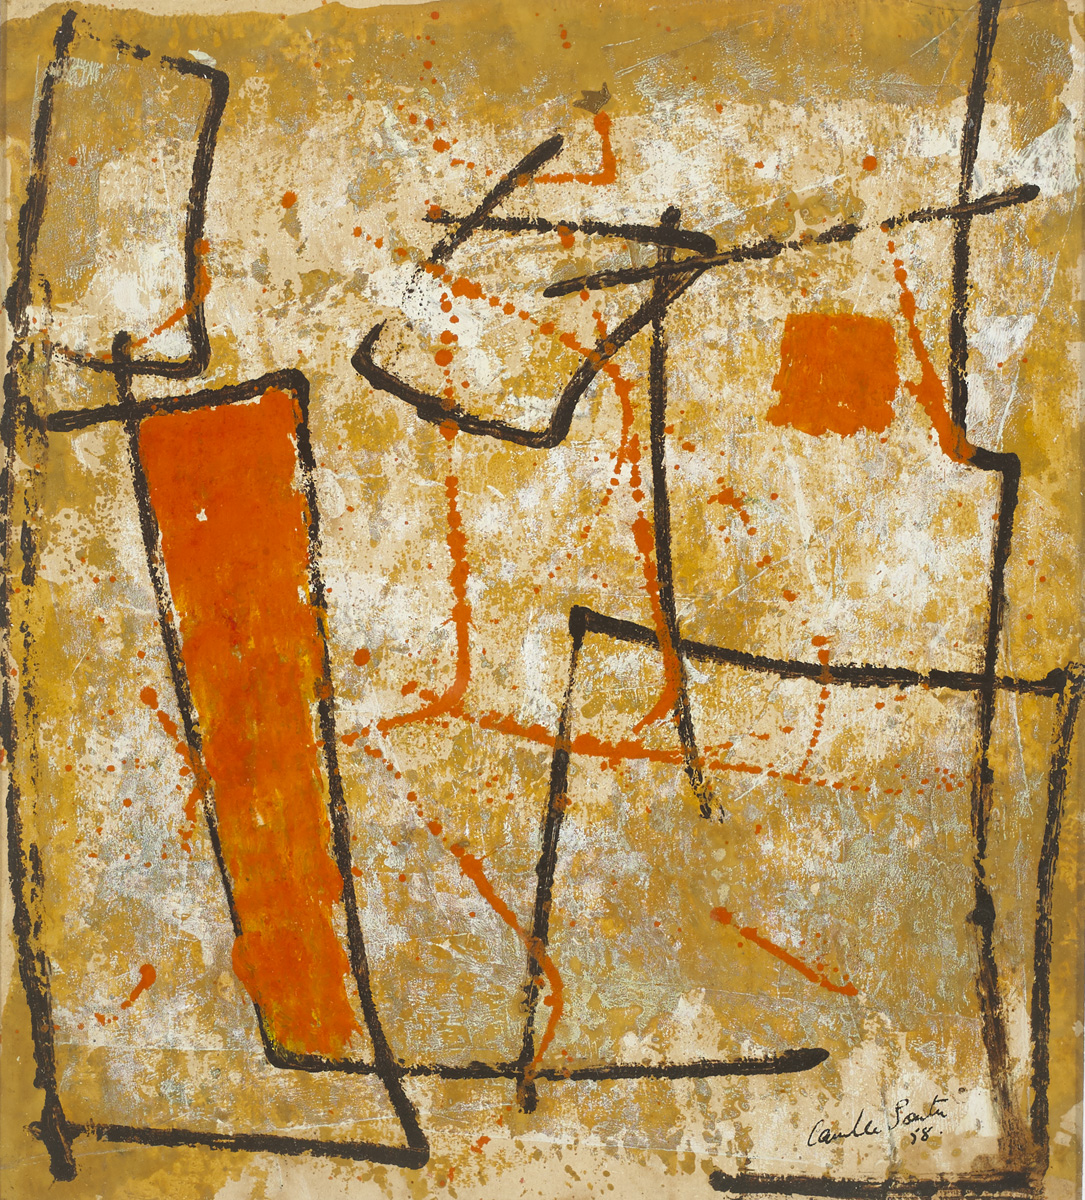 UNTITLED, 1958 by Camille Souter HRHA (b.1929) at Whyte's Auctions